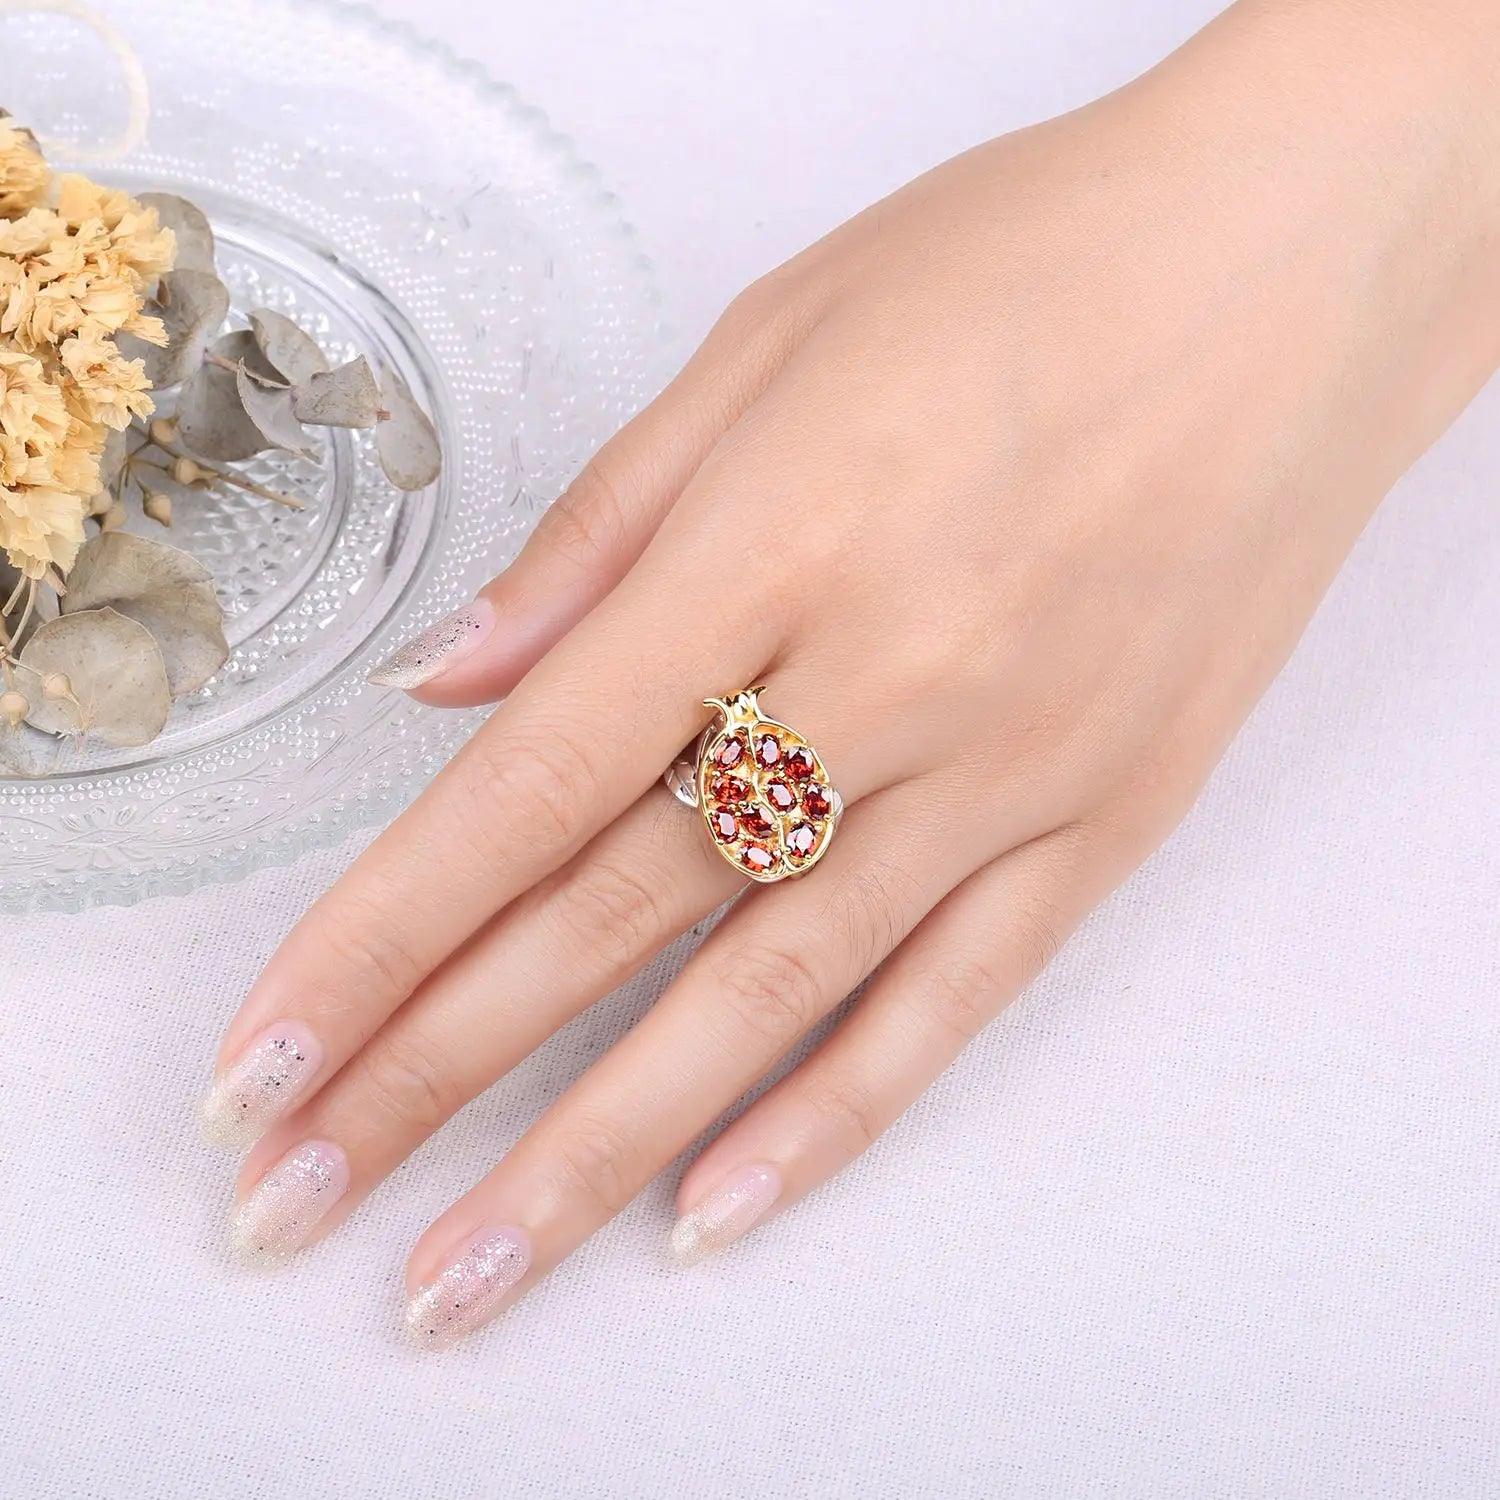 JPRCJ338 Finger Ring Charm Jewelry - Pomegranate Leaf Red Gemstone - 925 Sterling Silver - Touchy Style